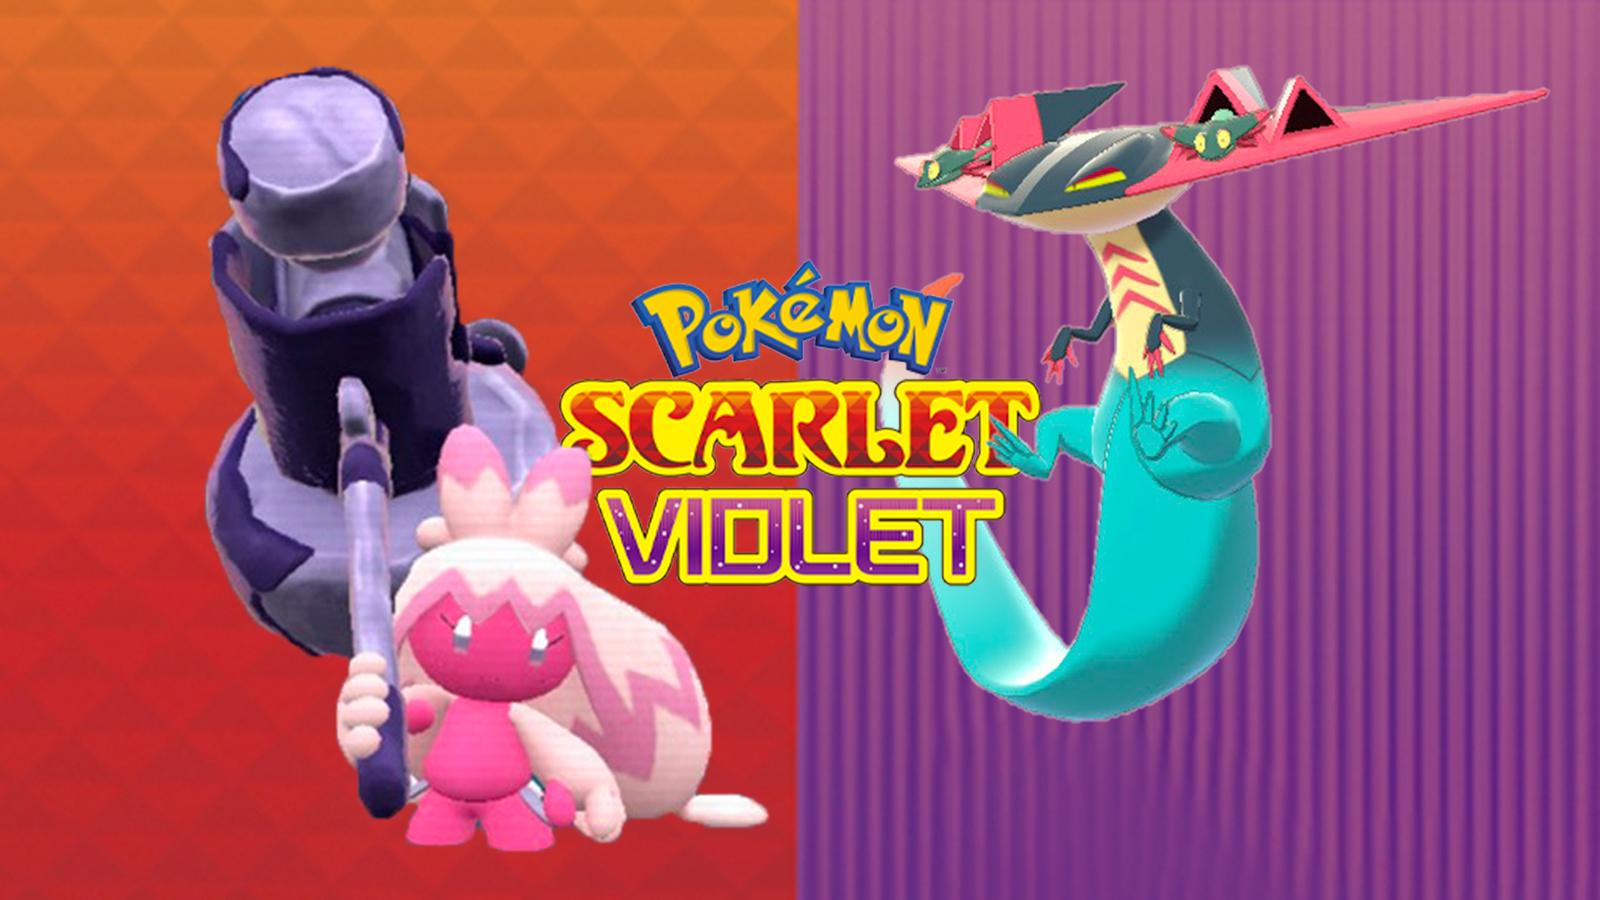 Tinkaton and Dragapult appearing as two of the best Pokemon in Pokemon Scarlet and Violet